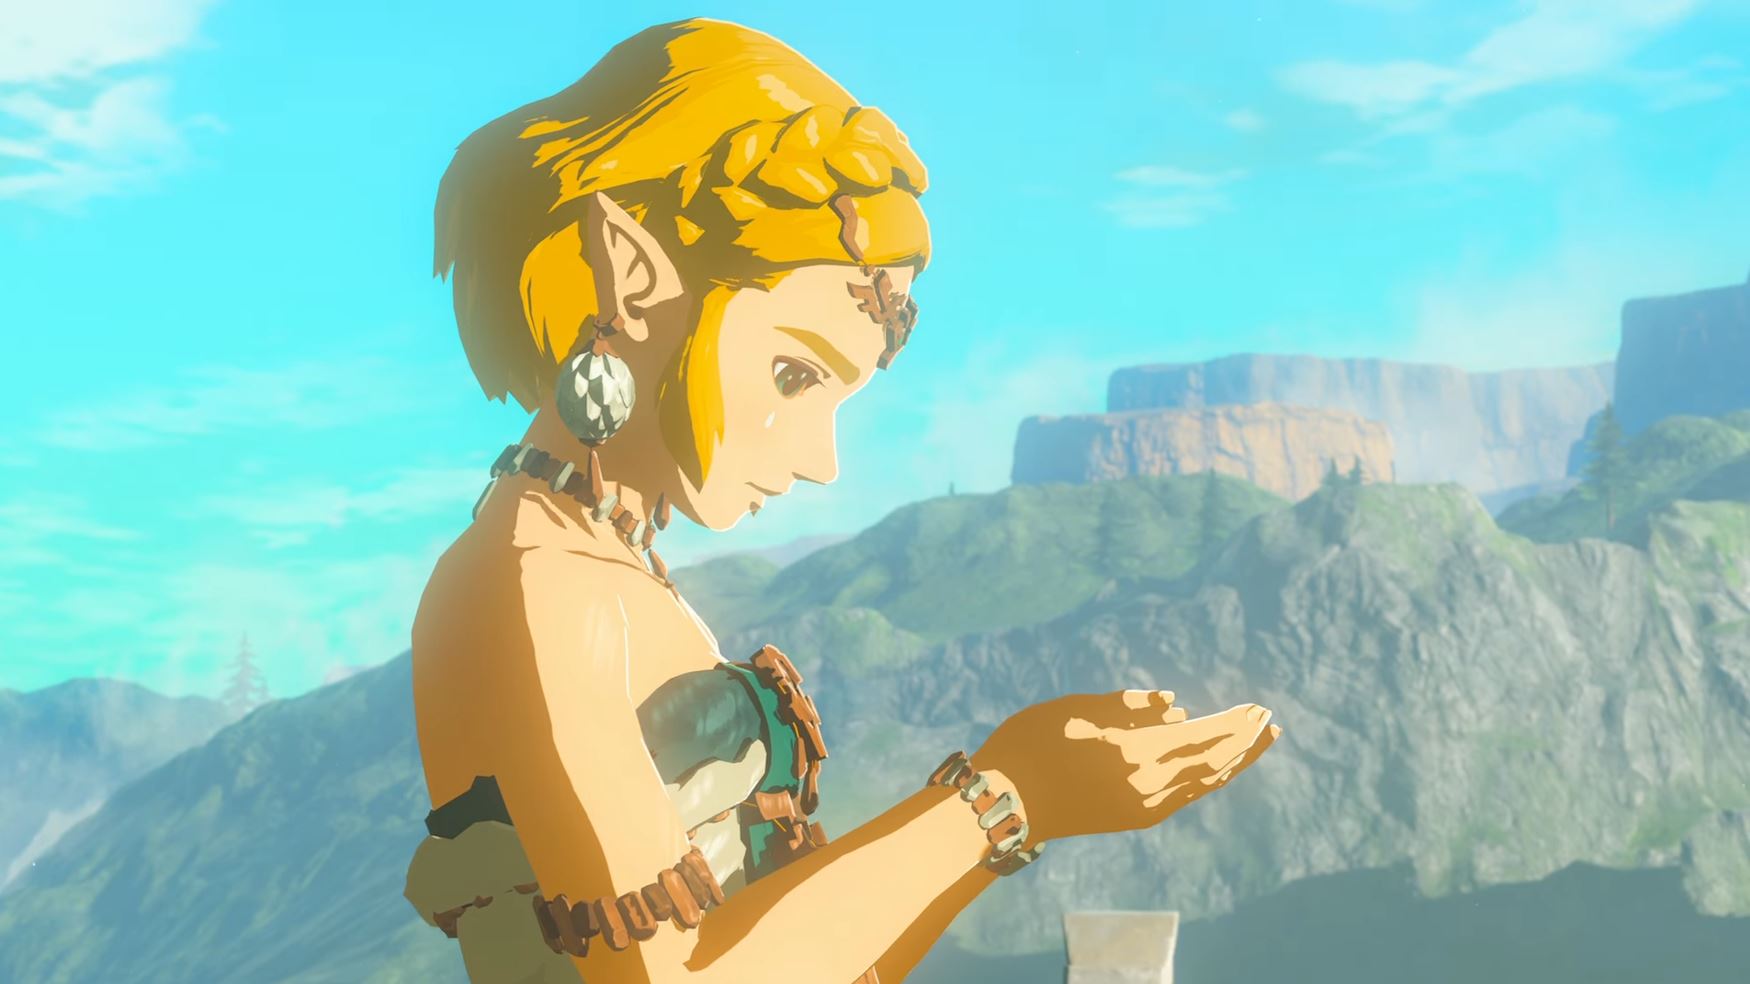 The Legend of Zelda: Tears of the Kingdom trailer analysis and